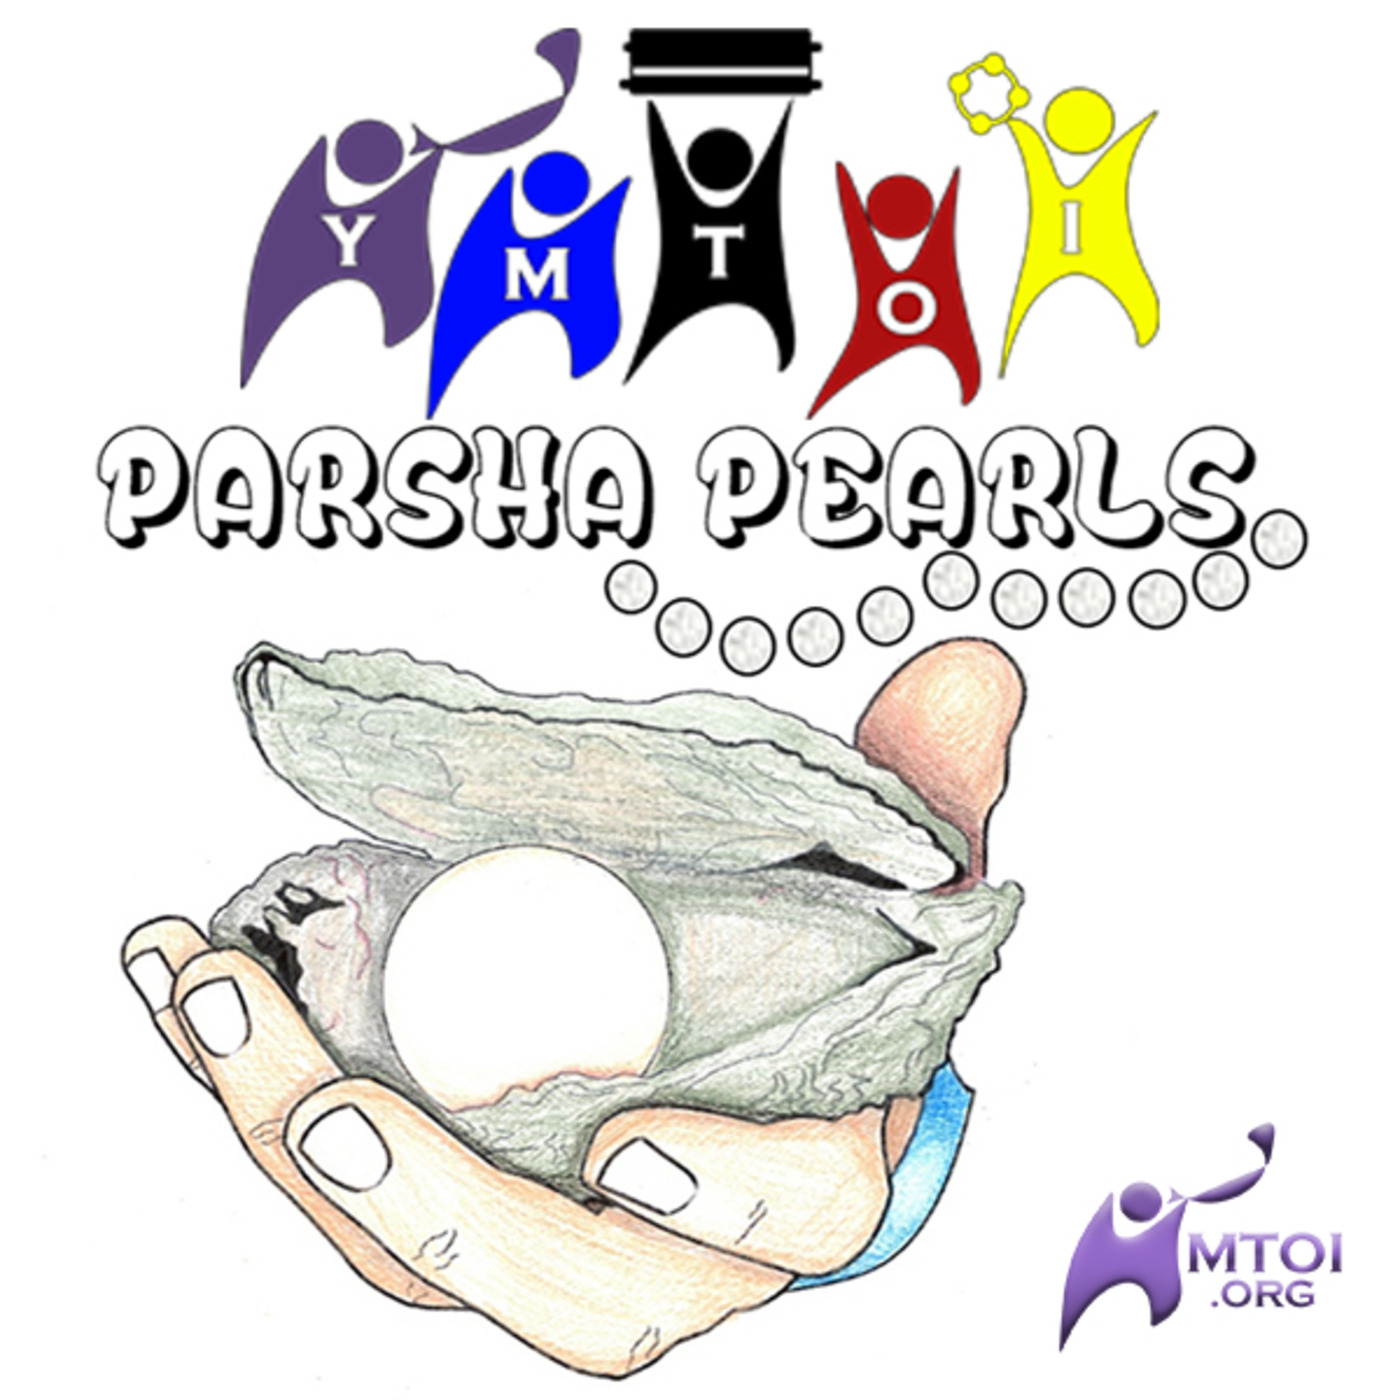 Episode 795: YMTOI Parsha Pearls Song for Vayeitzei 7.3 - Send Me On My Way